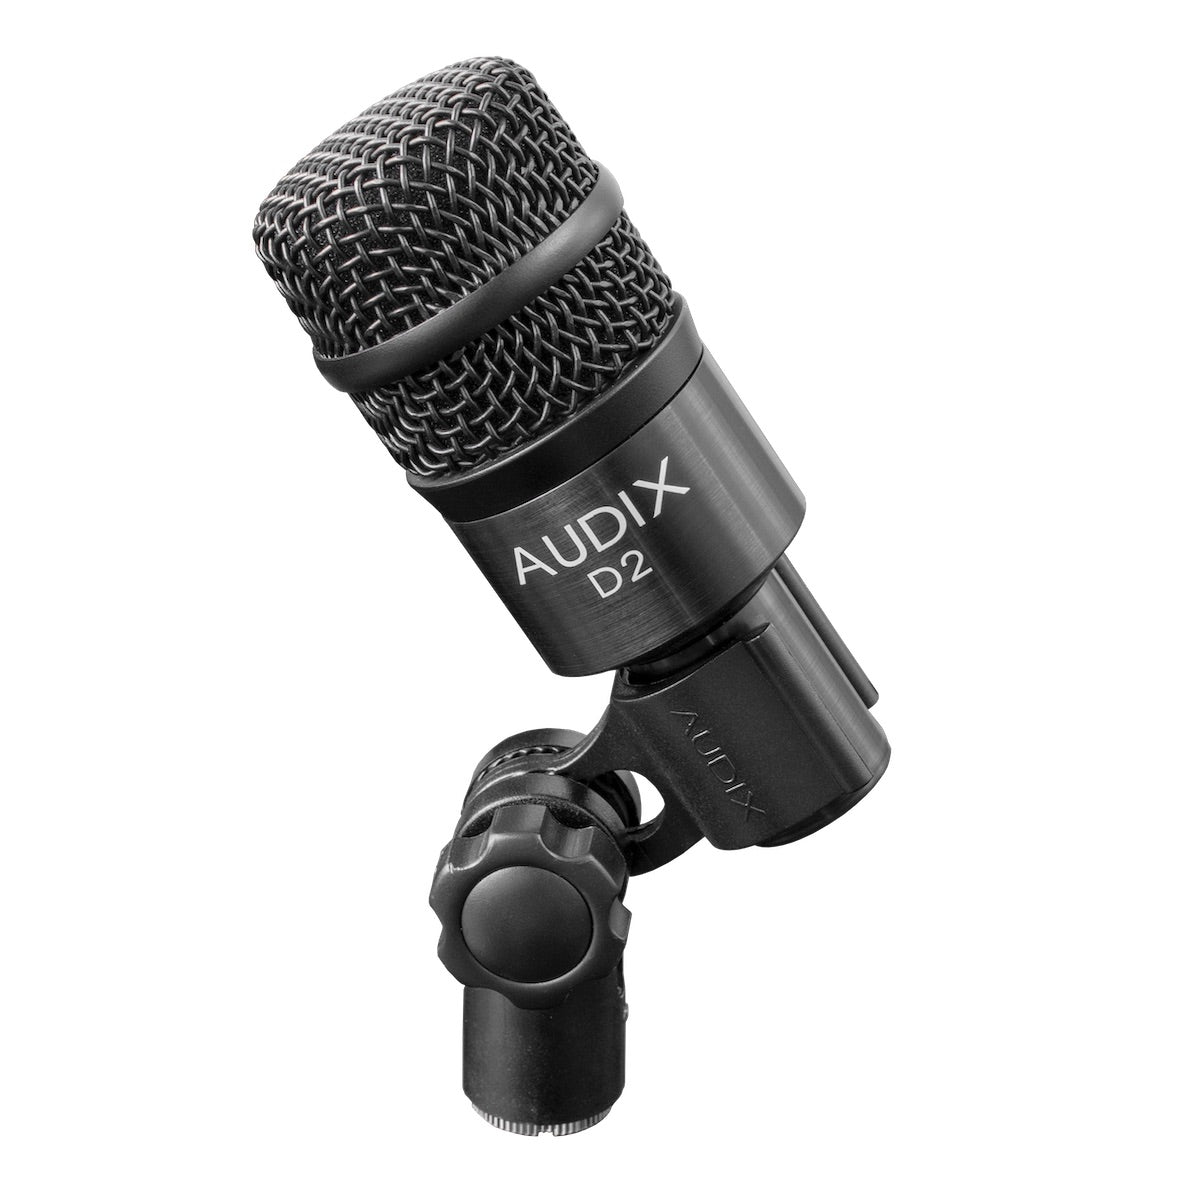 Audix D2 Professional Dynamic Instrument Microphone with clip